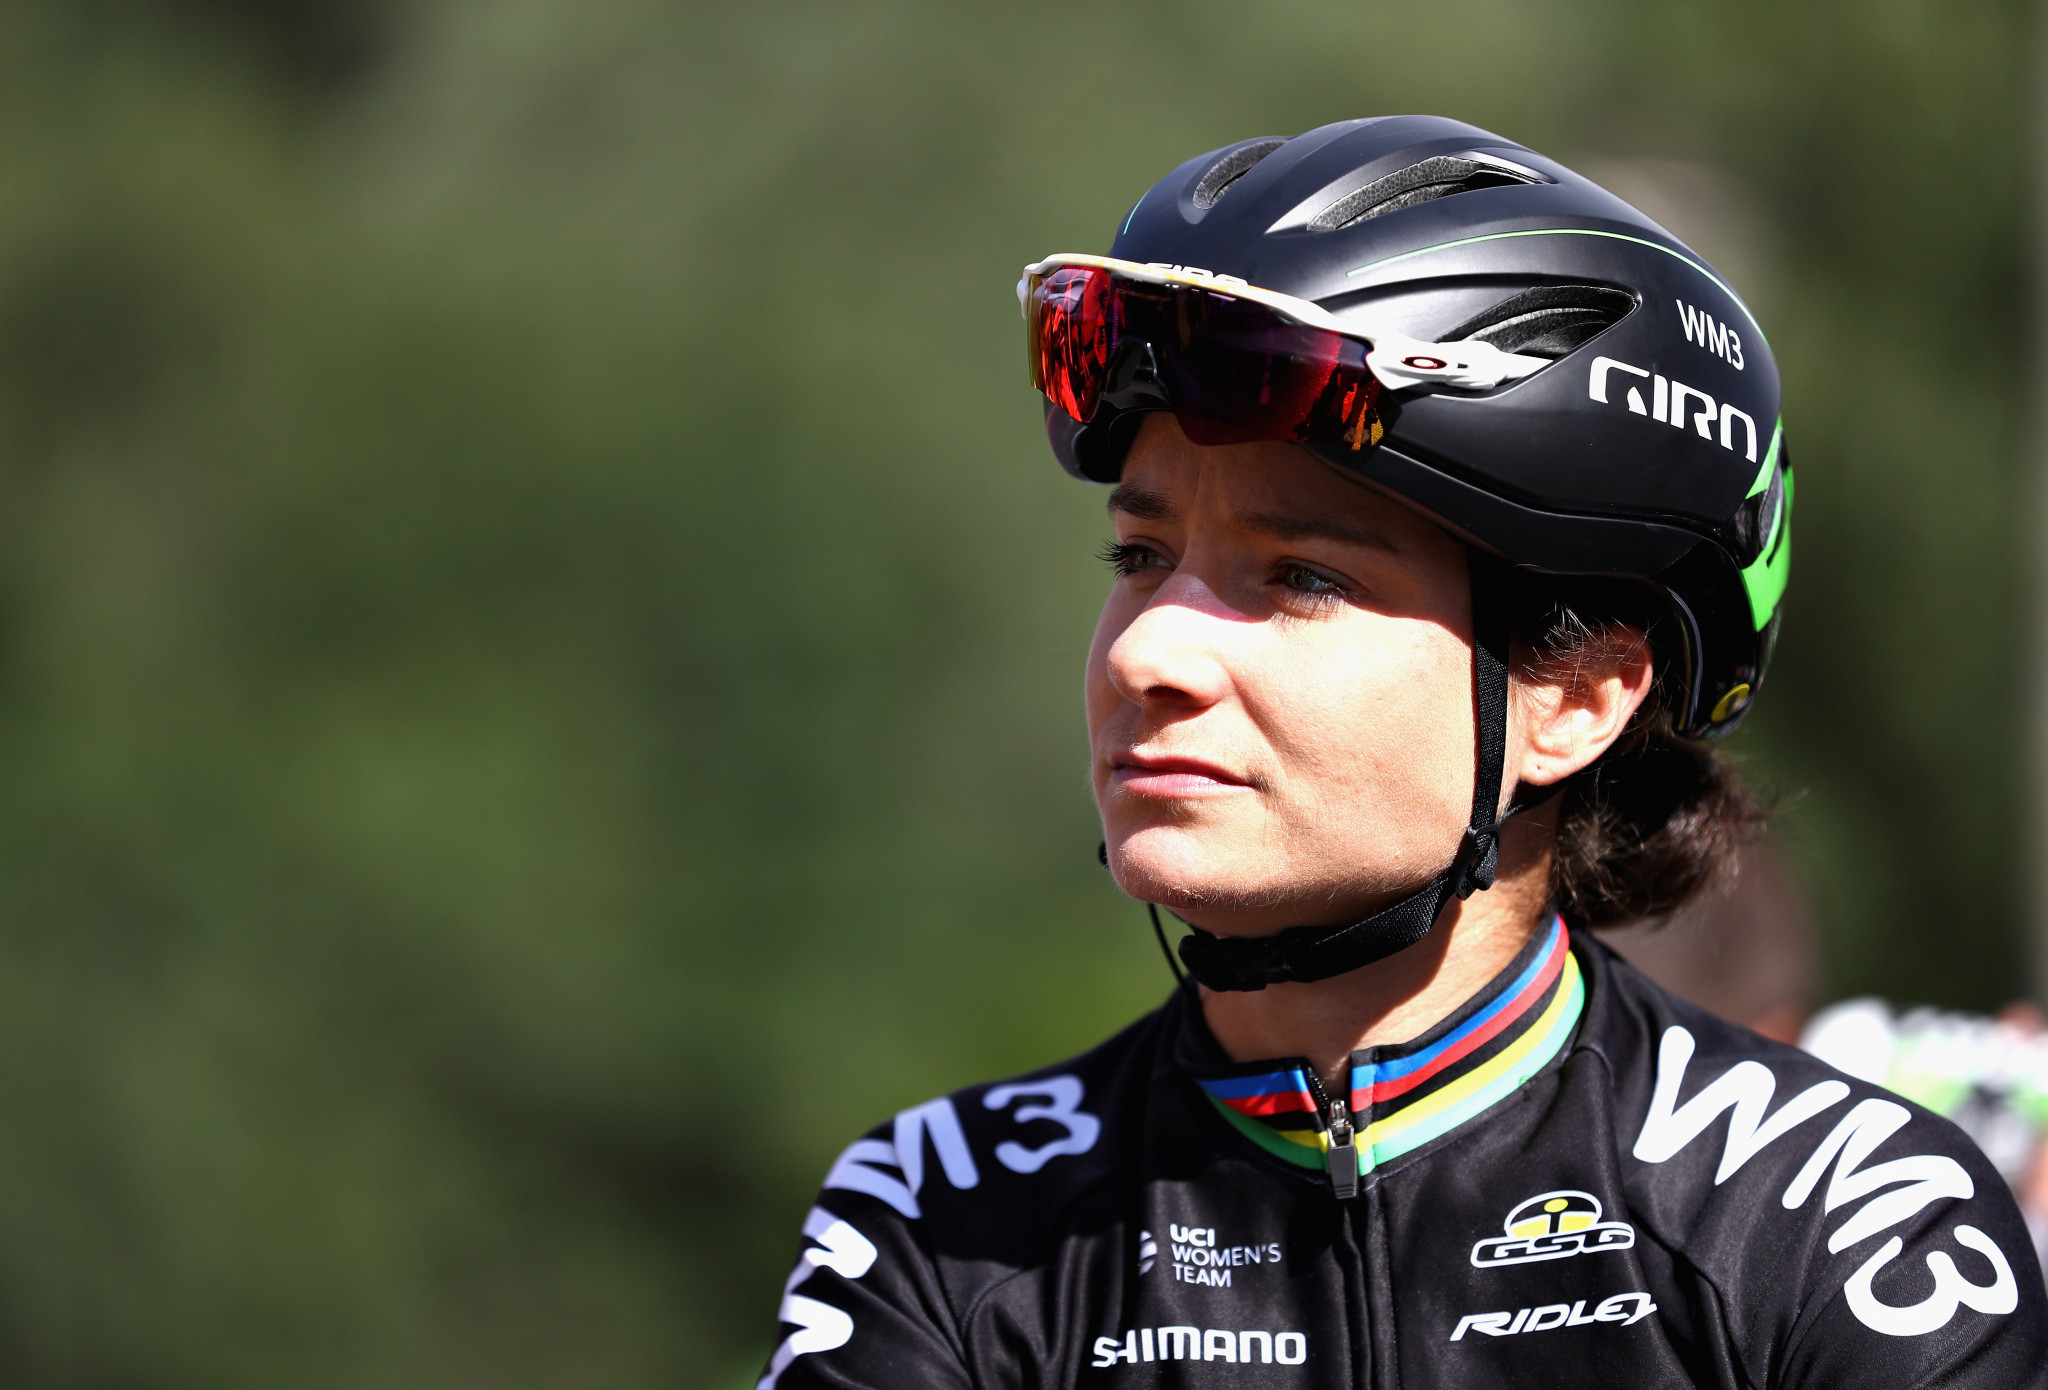 Vos out of Ovo Energy Women's Tour as D'hoore earns second stage win